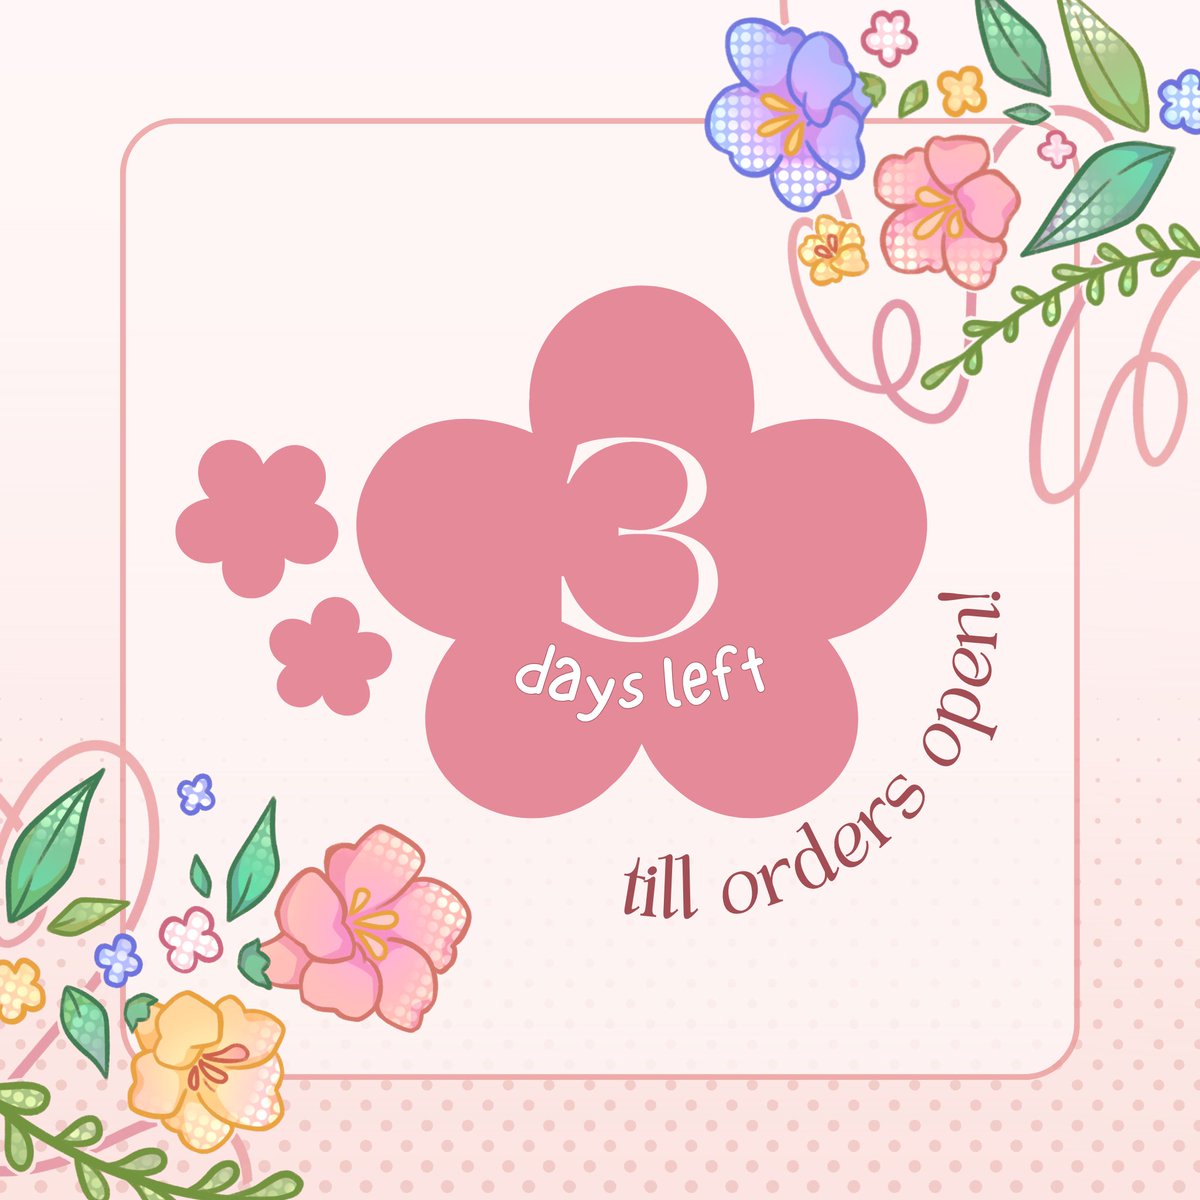 3 DAYS LEFT until the official Zine launch of Florilegium 2024! 💐📆

Grab a copy of the Zine as it releases by April 8 and support our cause! 🌷 

🌸 Check out our carrd for more info:
     ↳ florilegiumzine.carrd.co